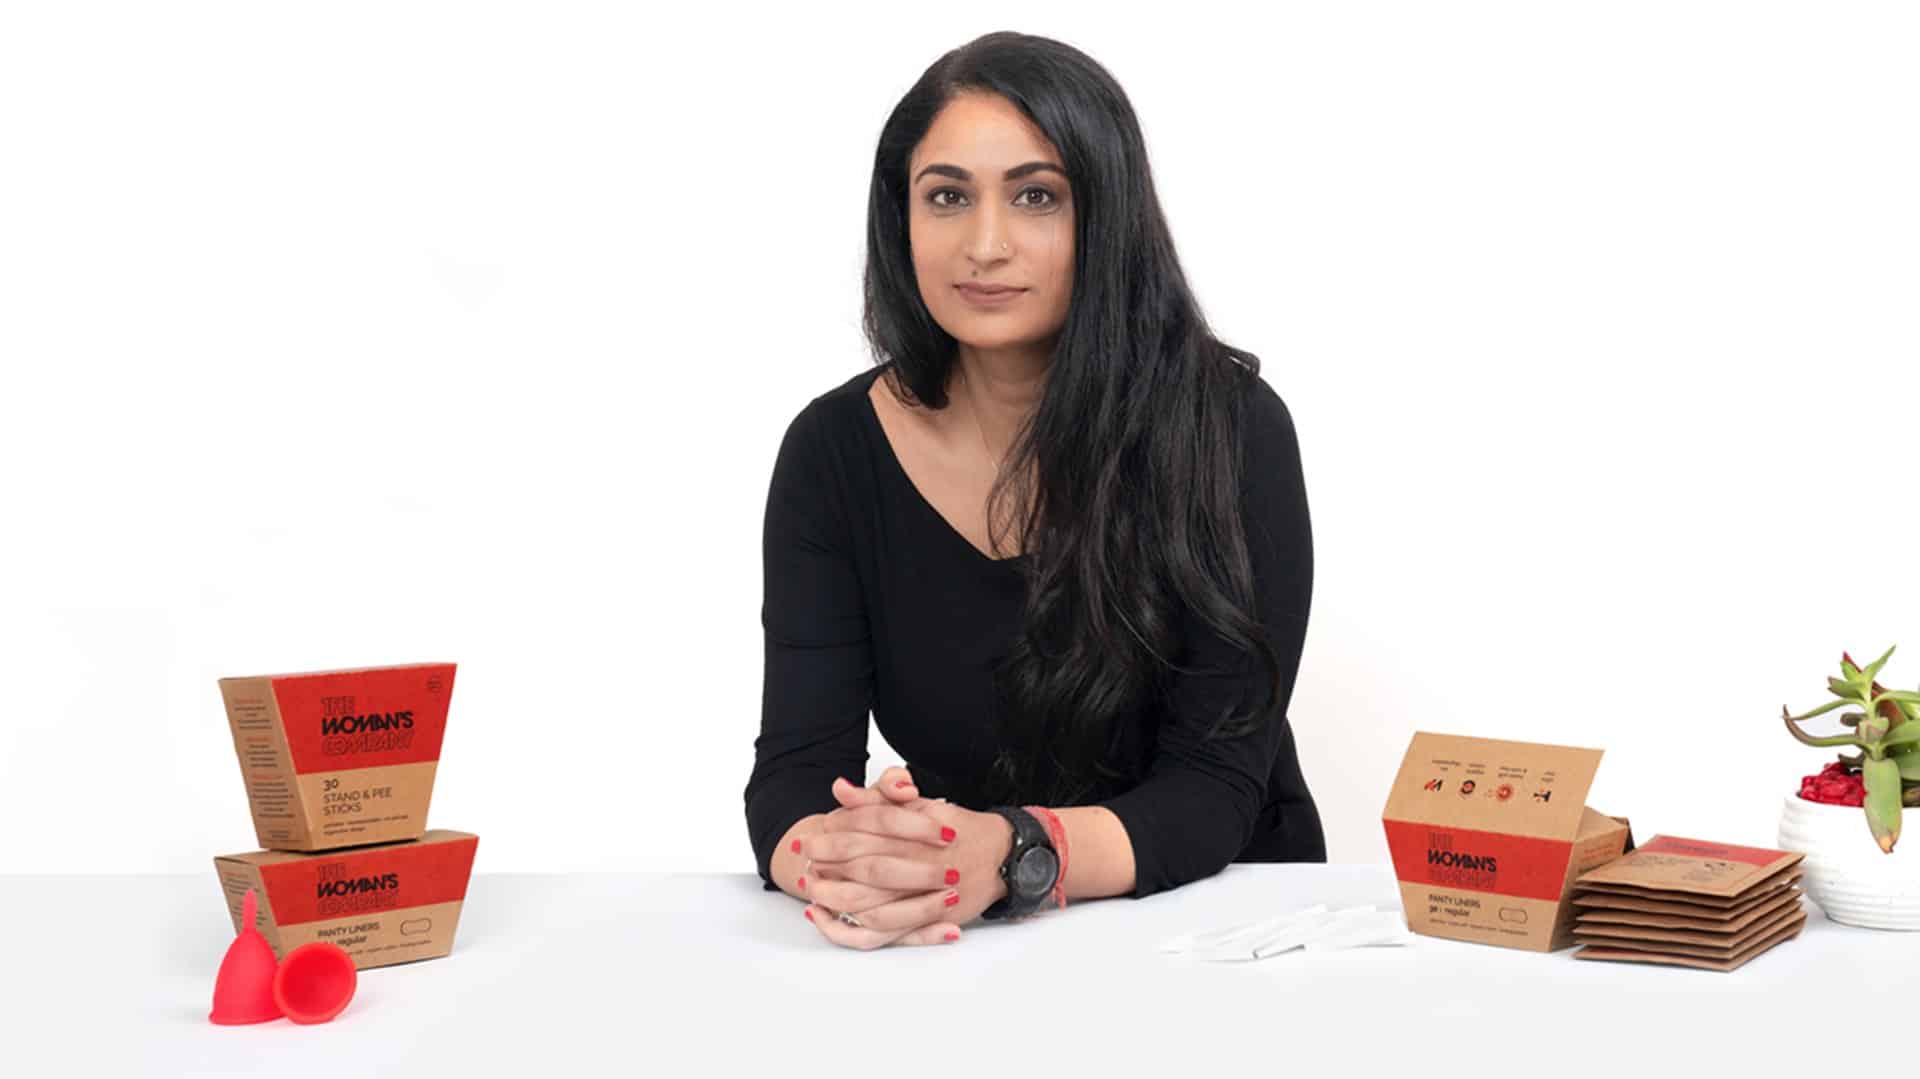 This startup is making waves in feminine hygiene segment with its sustainable products